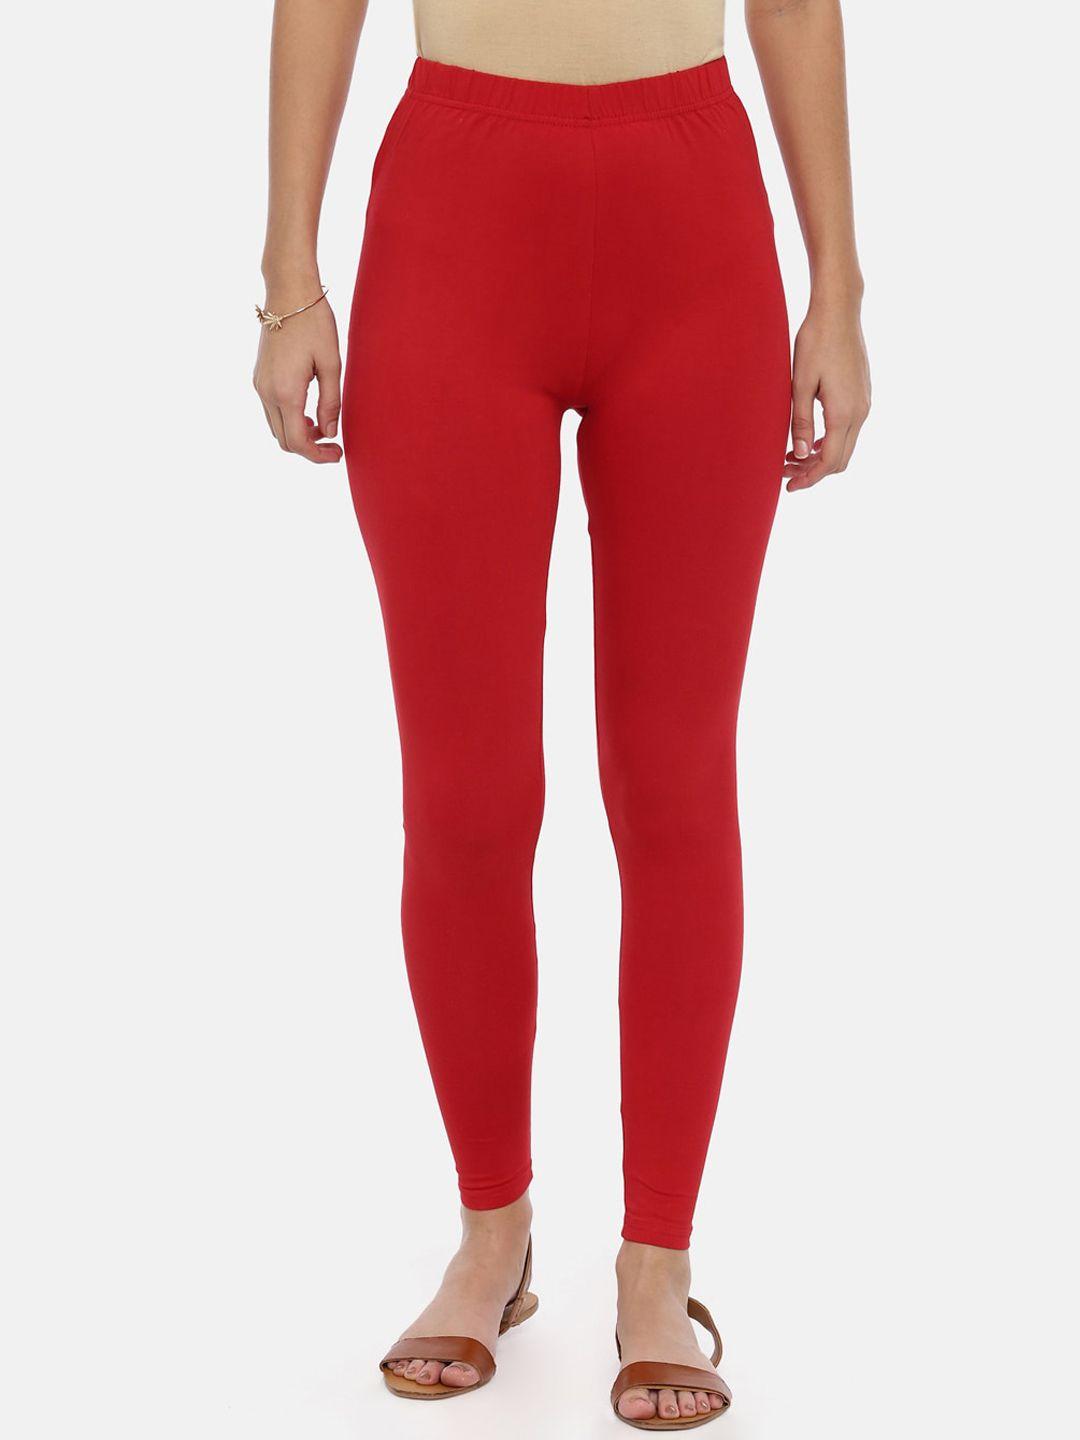 souchii women red solid slim-fit ankle-length leggings